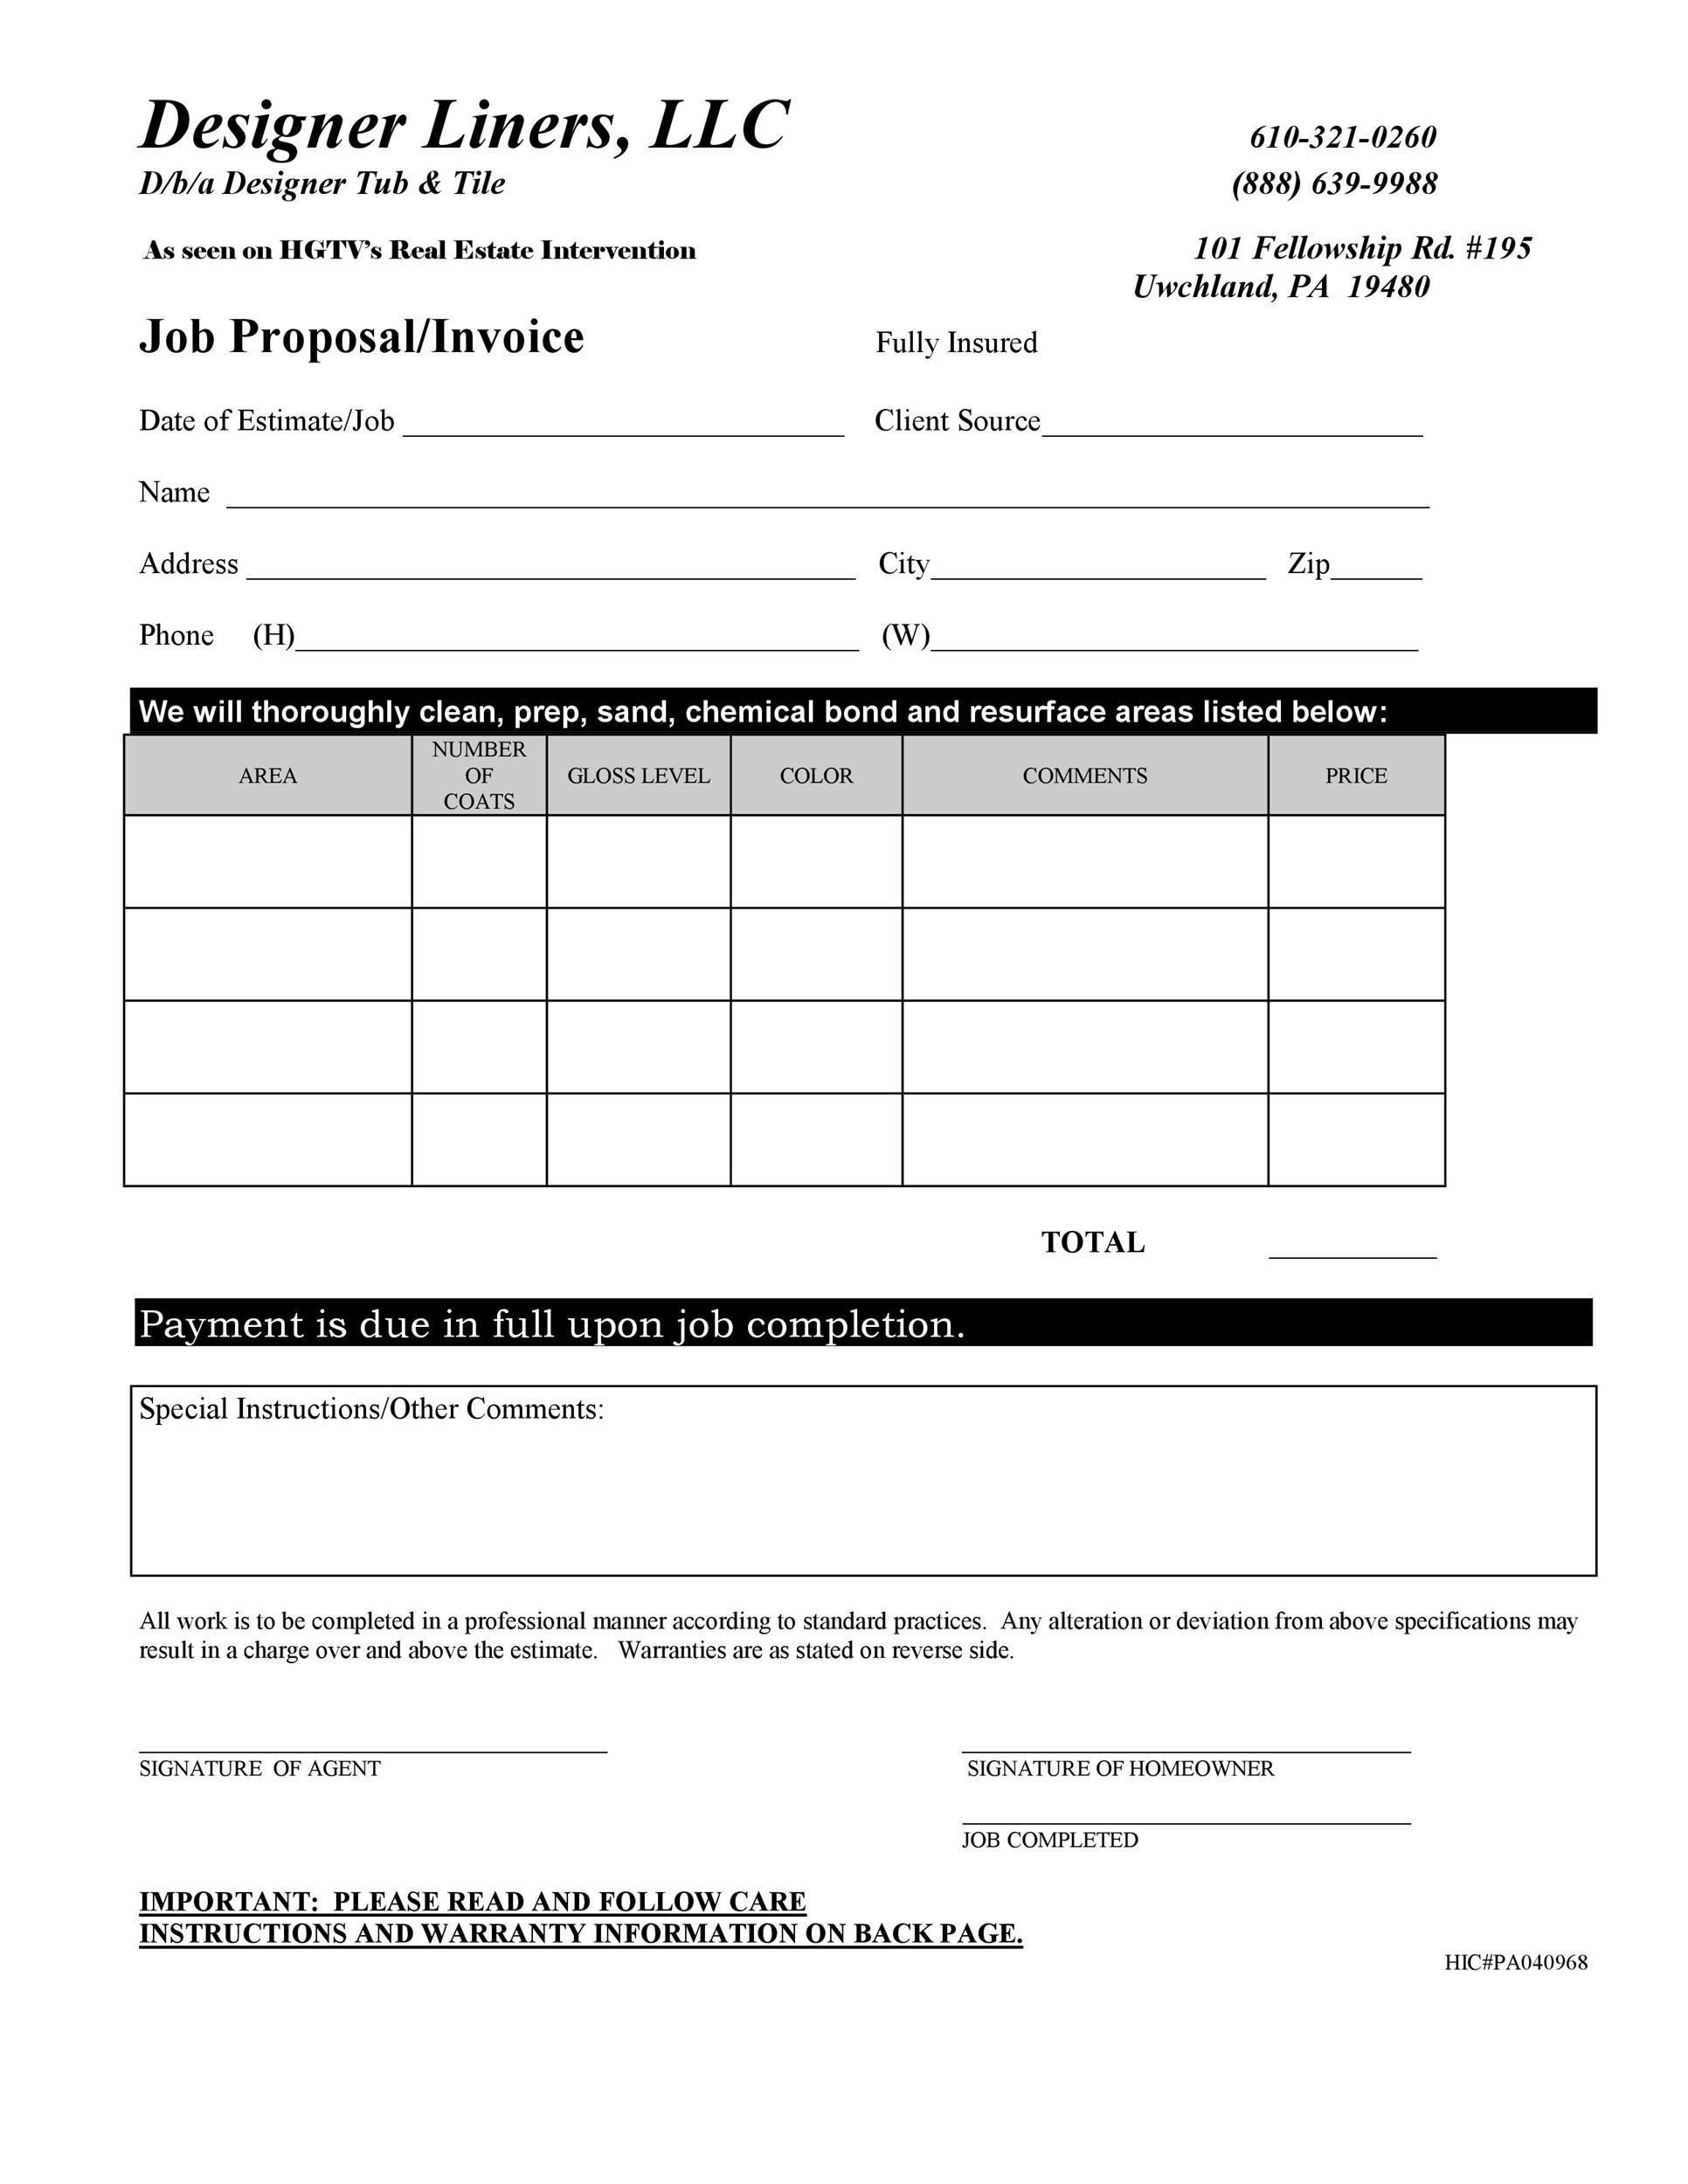 Printable Proposal Forms TUTORE ORG Master of Documents